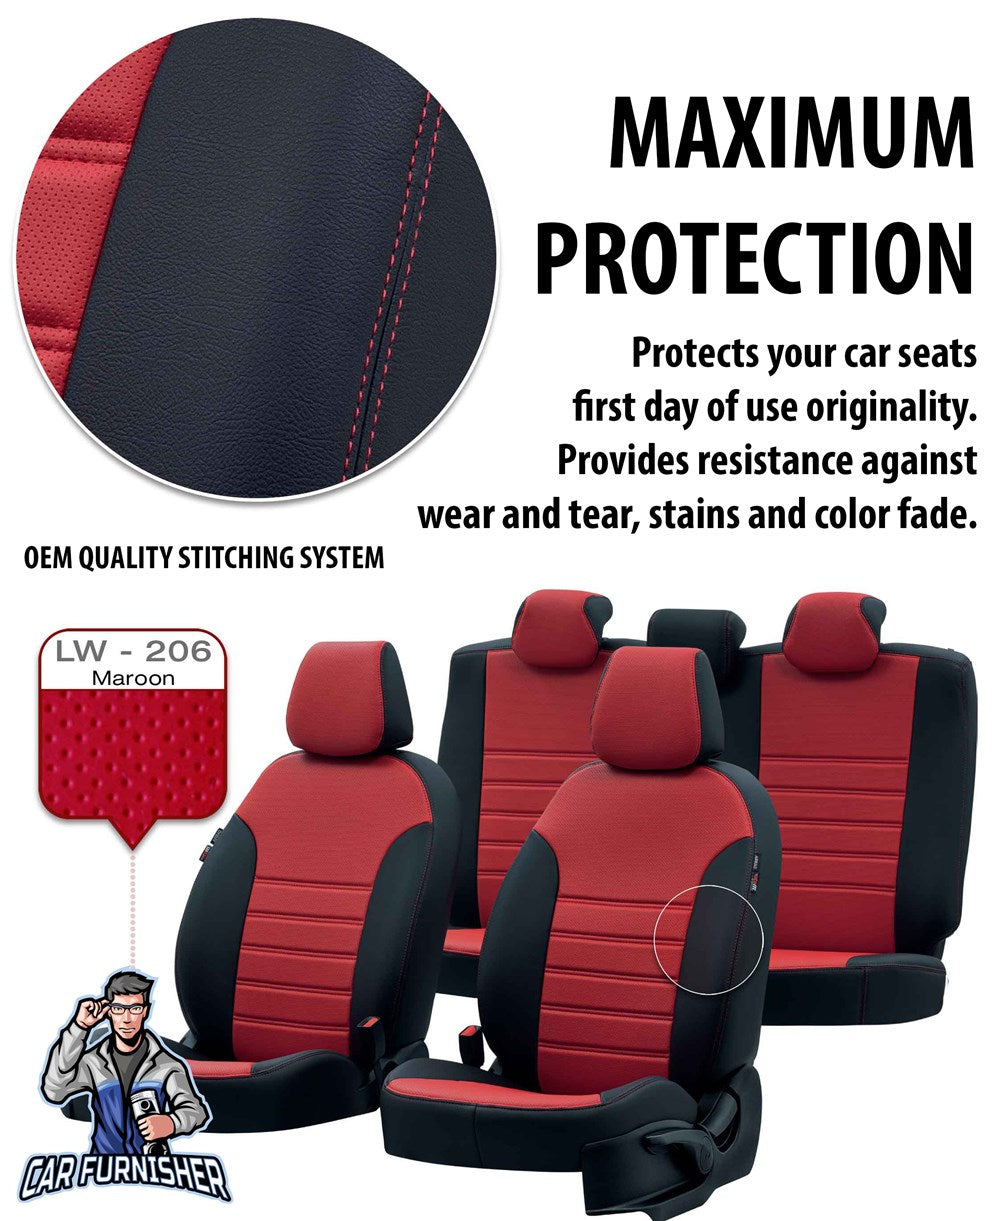 Volkswagen Amarok Seat Cover Istanbul Leather Design Burgundy Leather